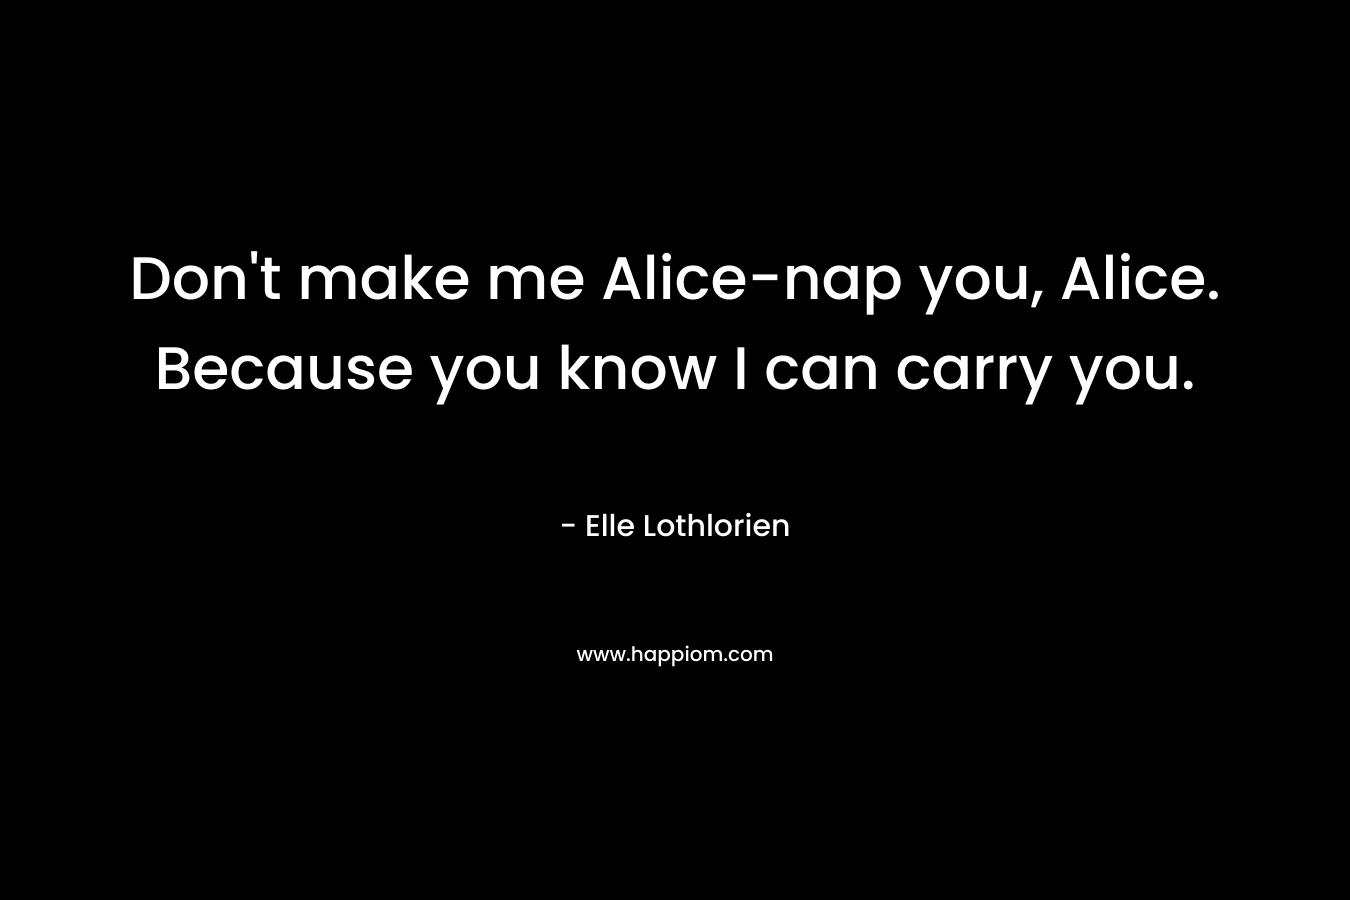 Don't make me Alice-nap you, Alice. Because you know I can carry you.